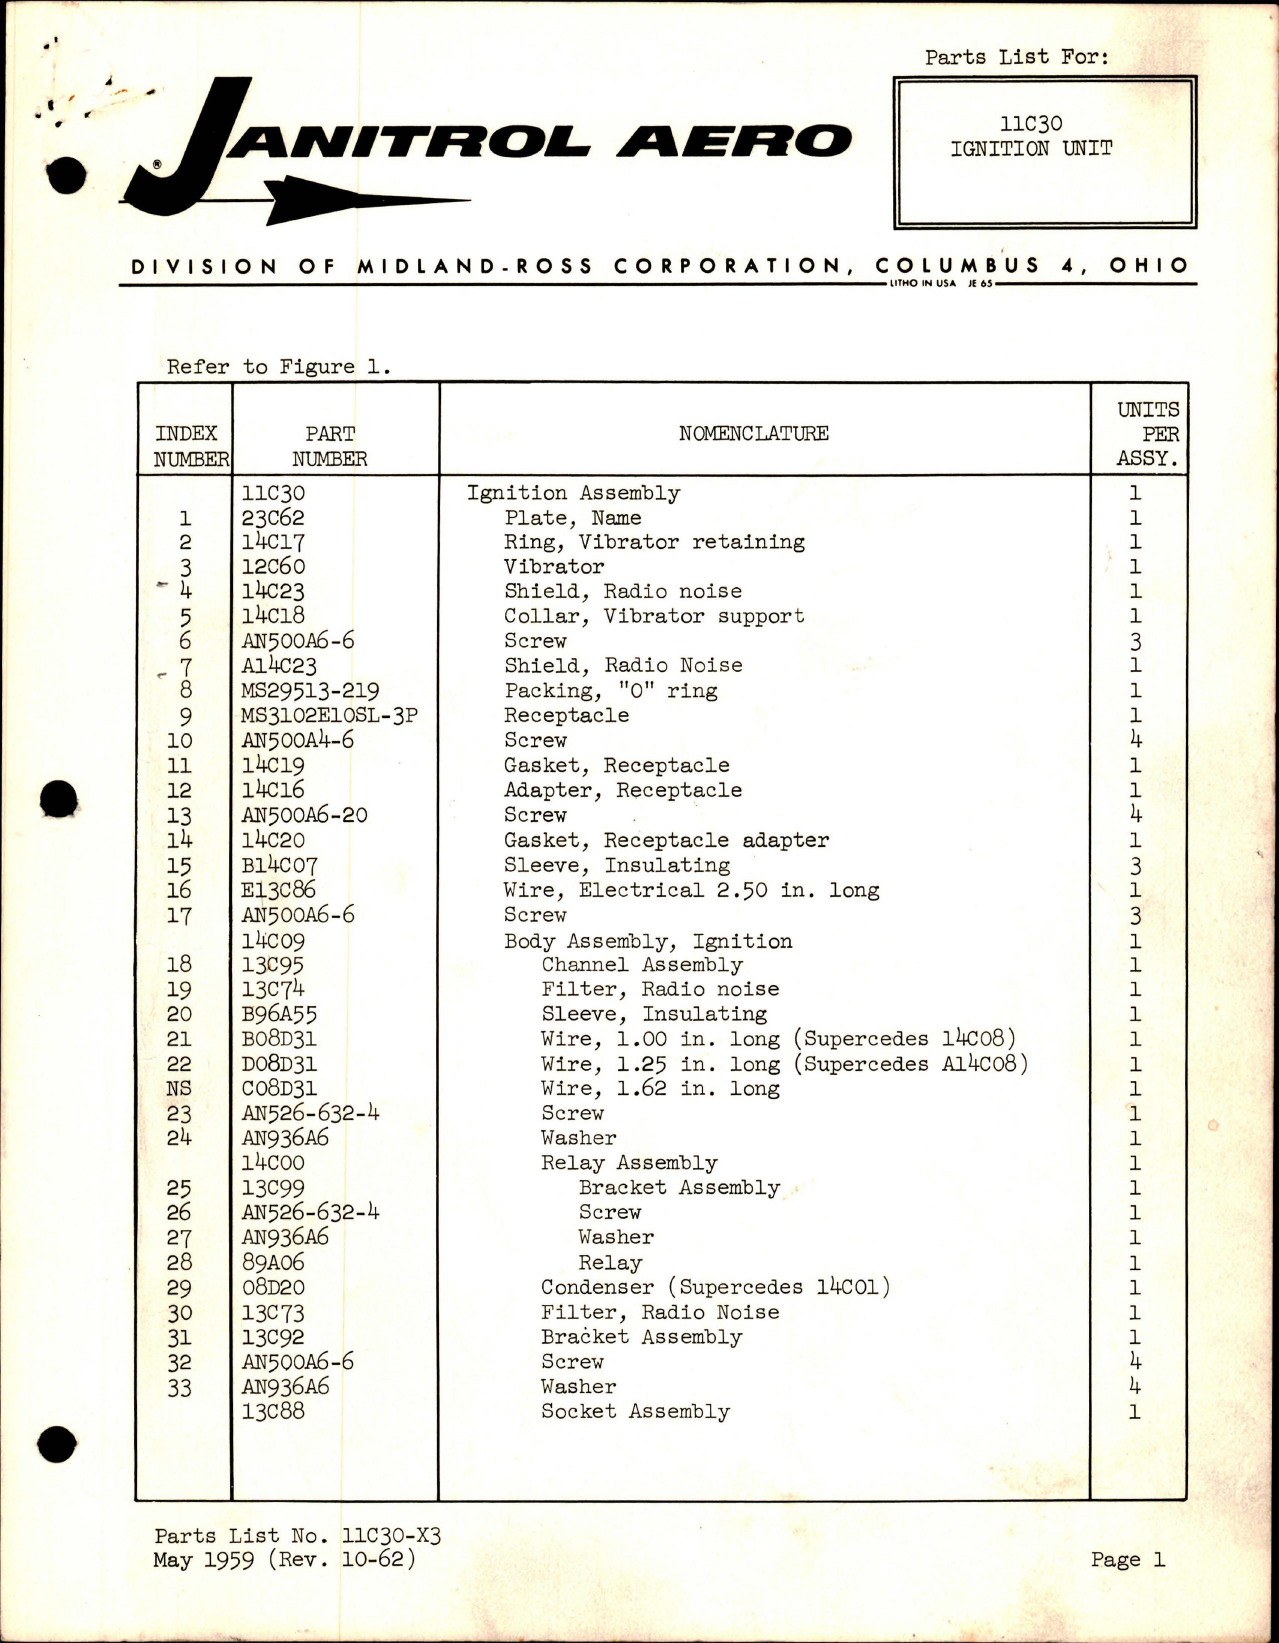 Sample page 1 from AirCorps Library document: Parts List for Ignition Unit 11C30 